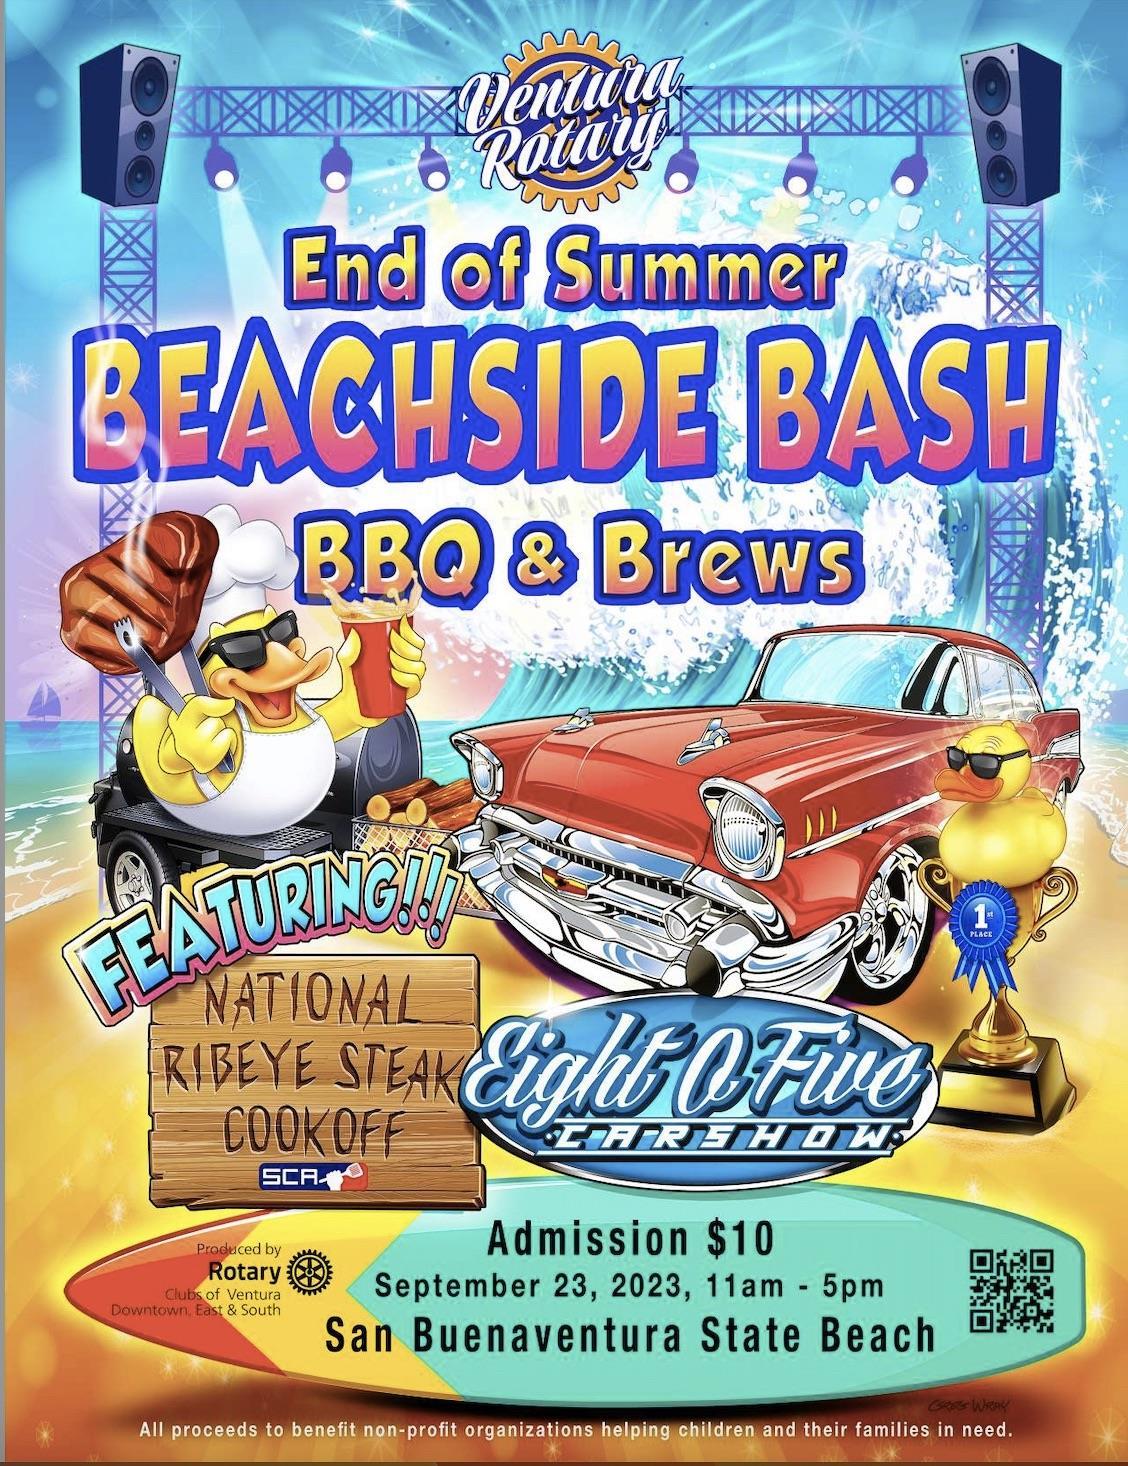 Event Web Page and Ticket Purchase https://www.venturabeachsidebash.com/